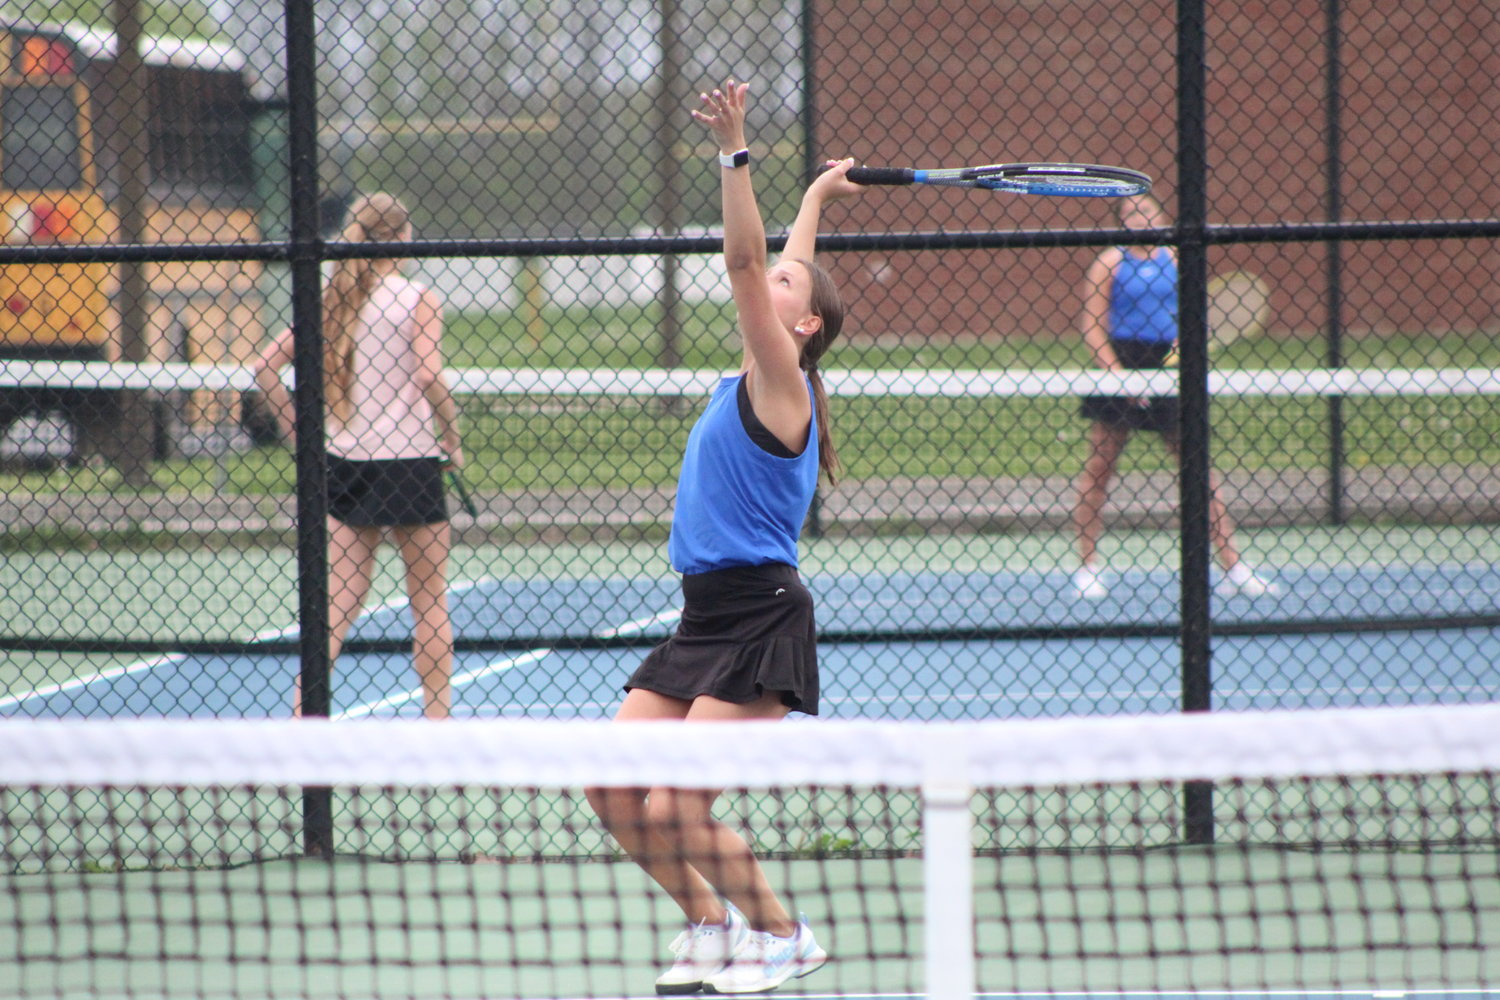 Reese Minnette goes up for a serve during her match at two singles.